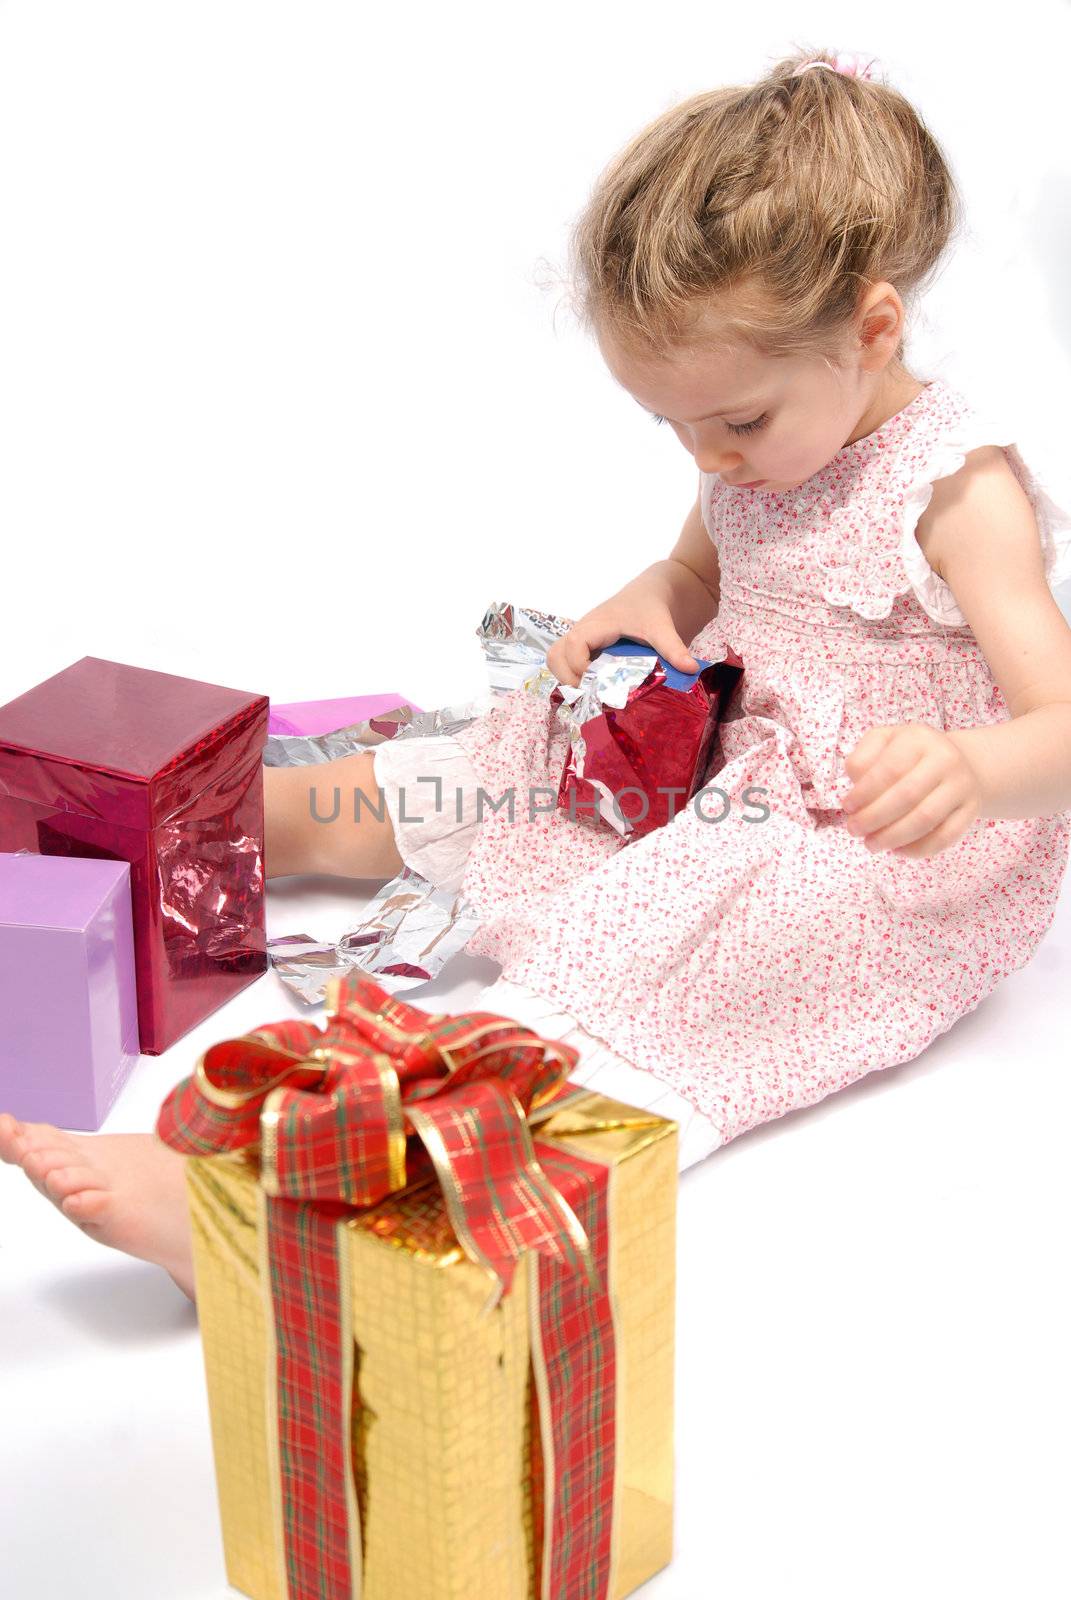 Girl opening Christmas presents by cienpies